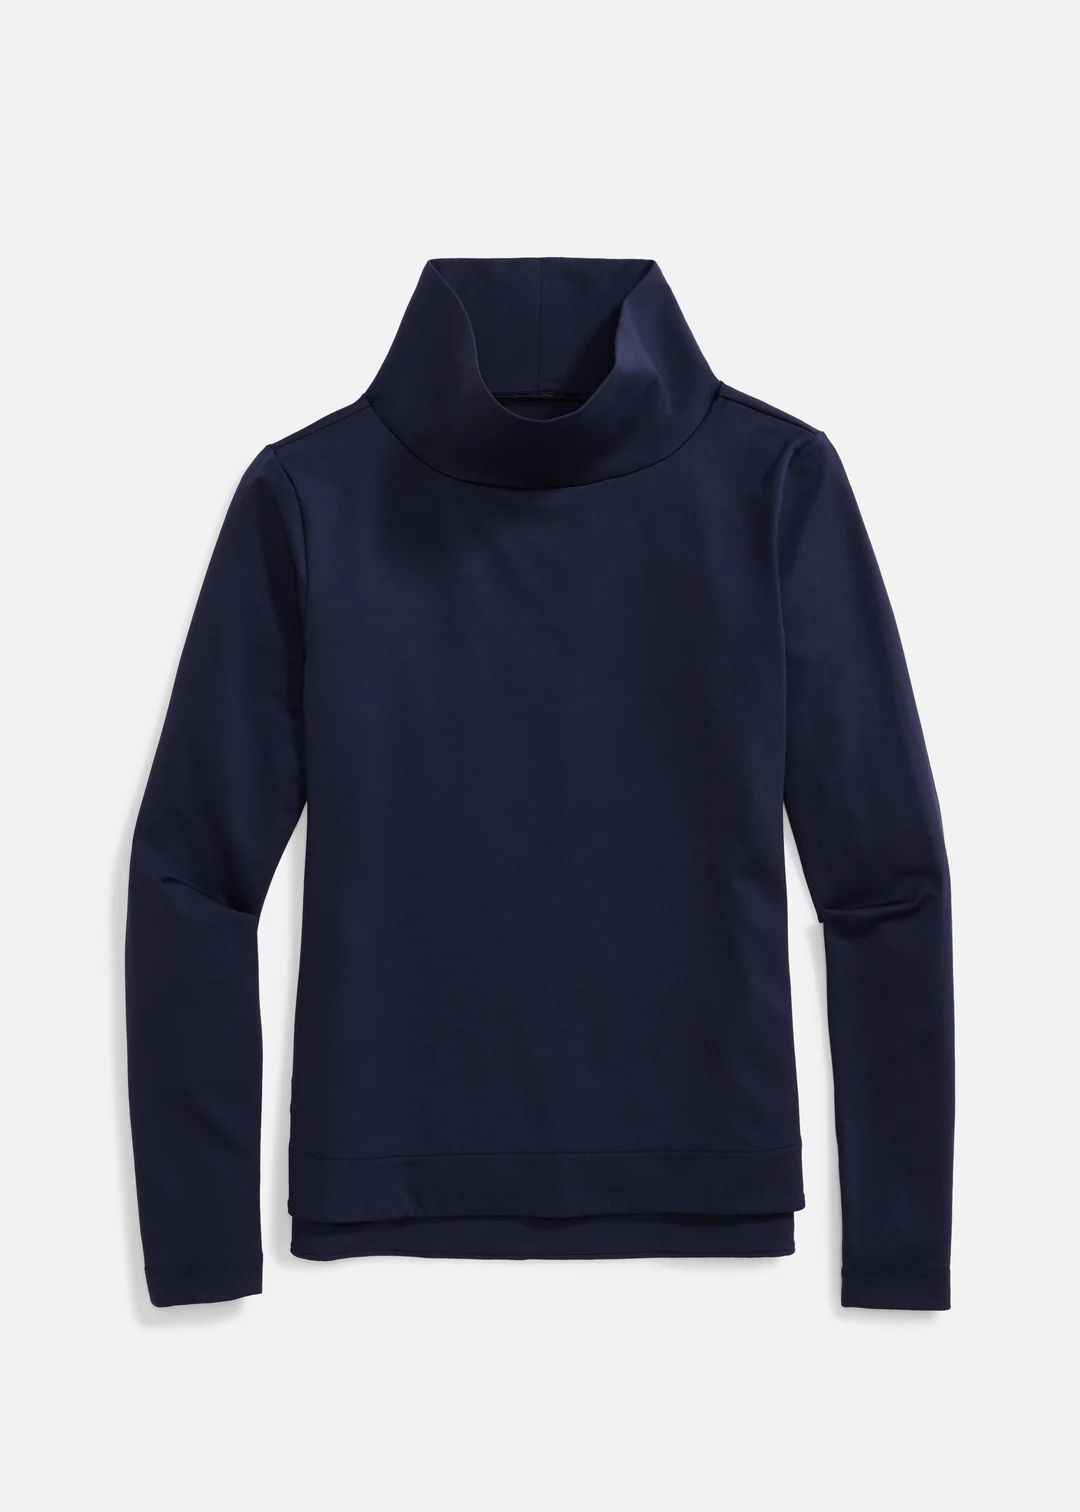 Summit Turtleneck in Repreve® Stretch (Navy) | Dudley Stephens